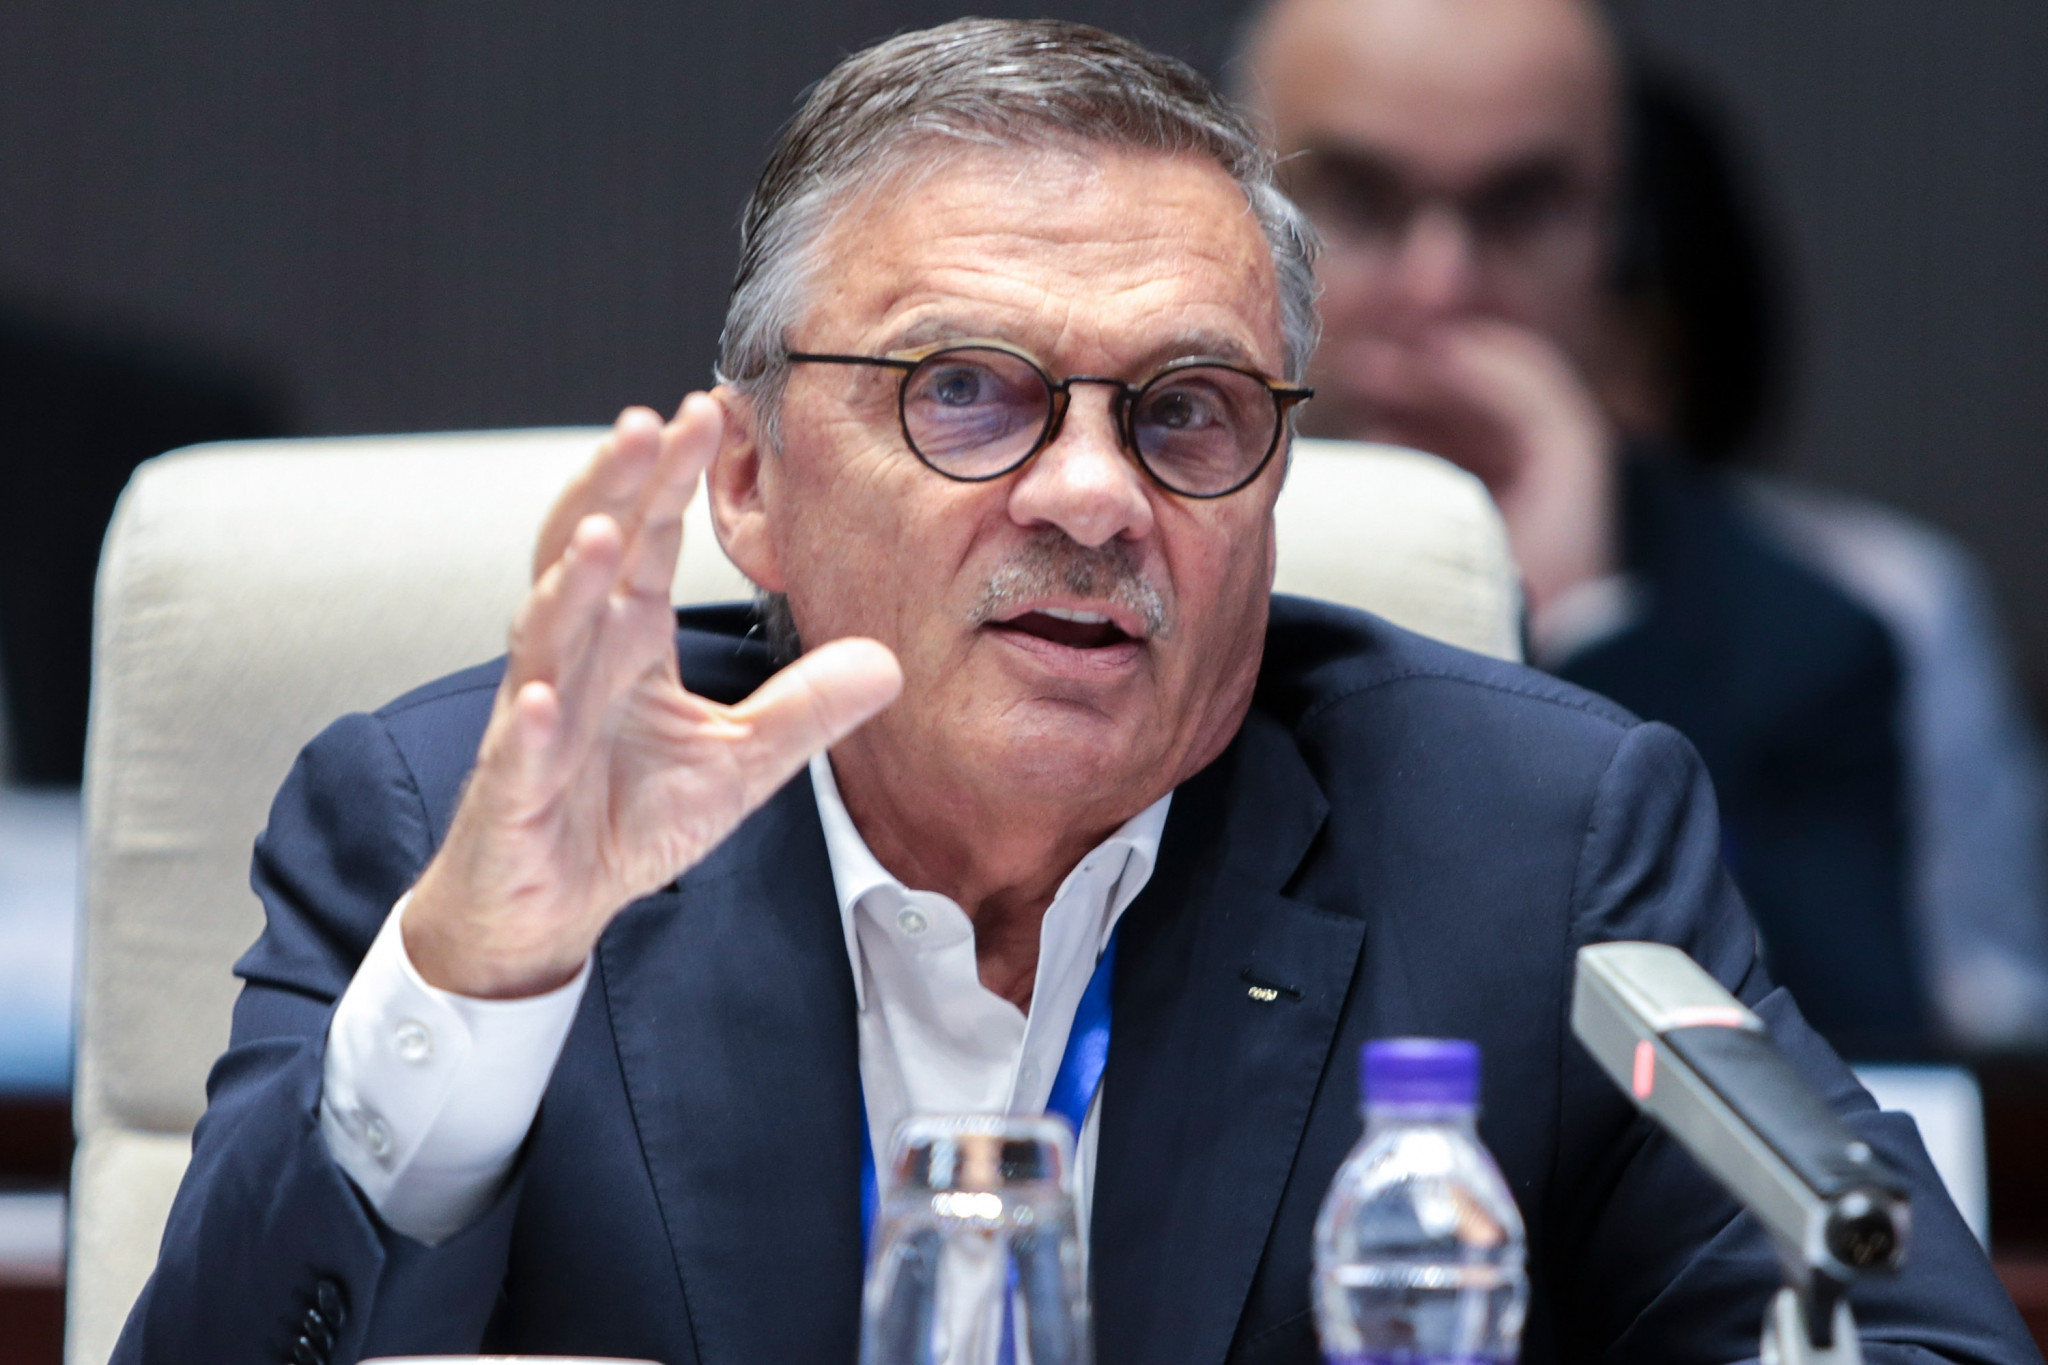 René Fasel stepped down as IIHF President, having held the role since 1994 ©Getty Images